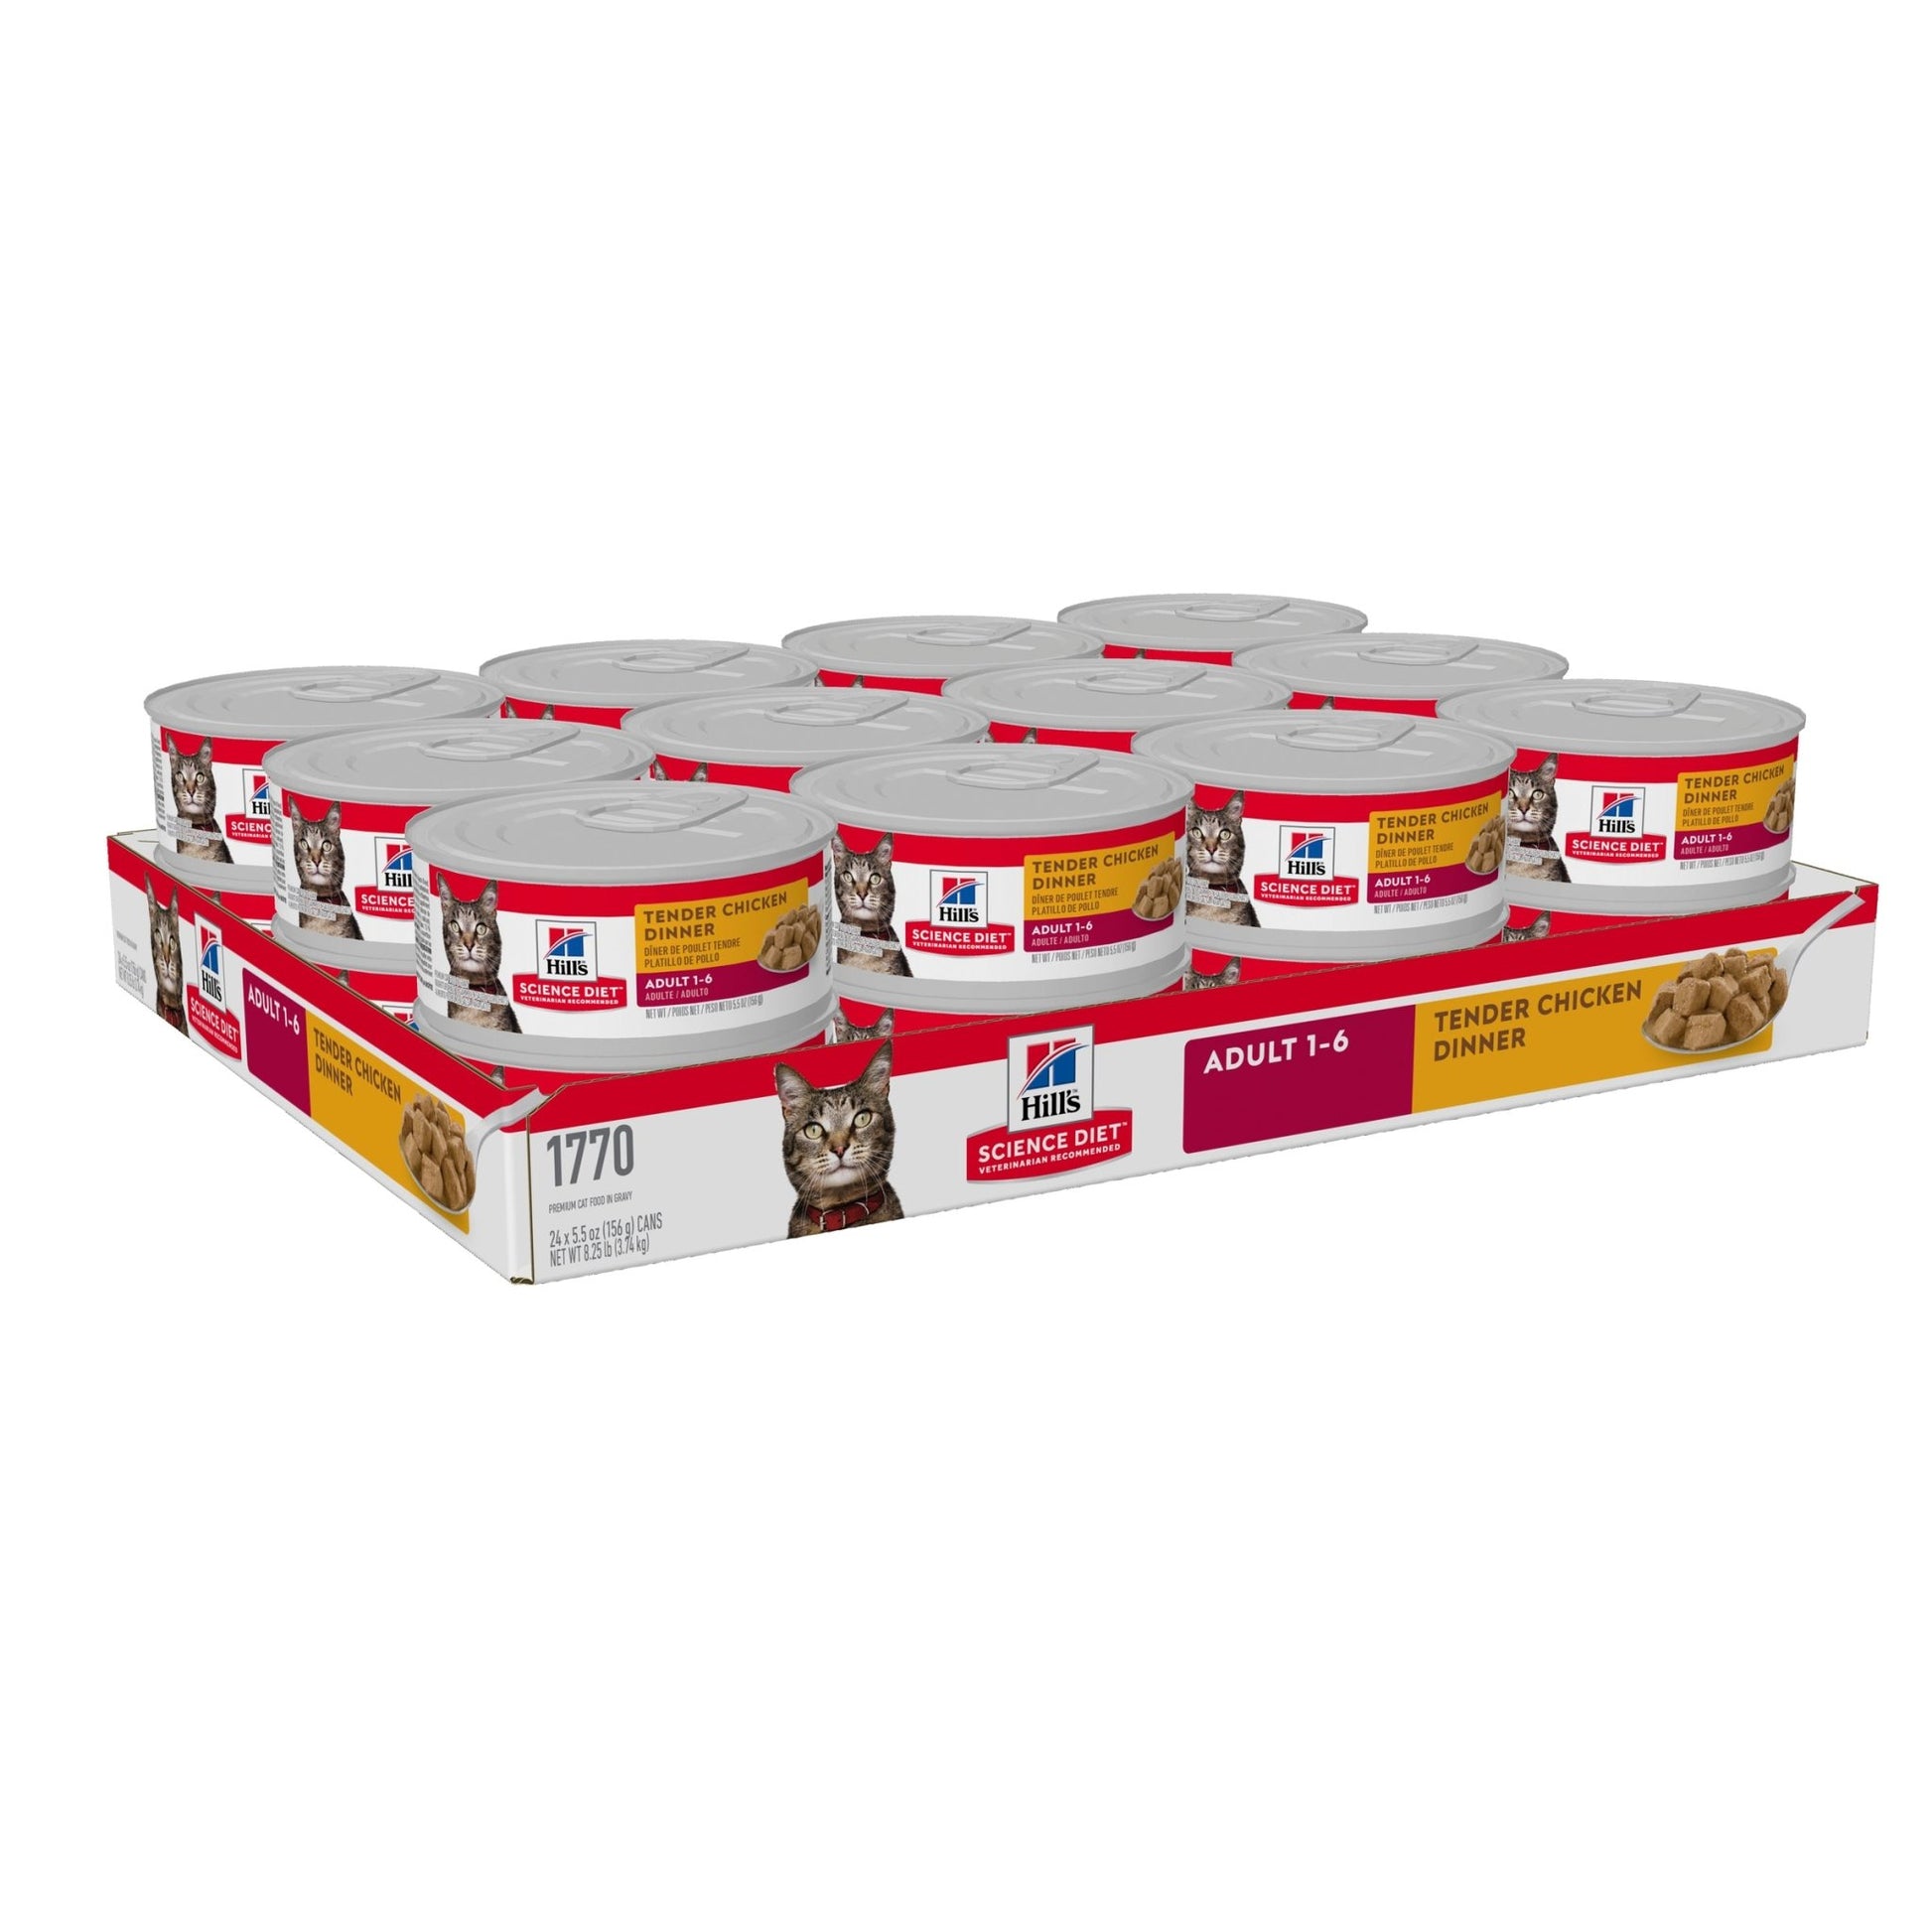 Hill's Science Diet Adult Tender Dinners Chicken Canned Cat Food 24x156g - Woonona Petfood & Produce